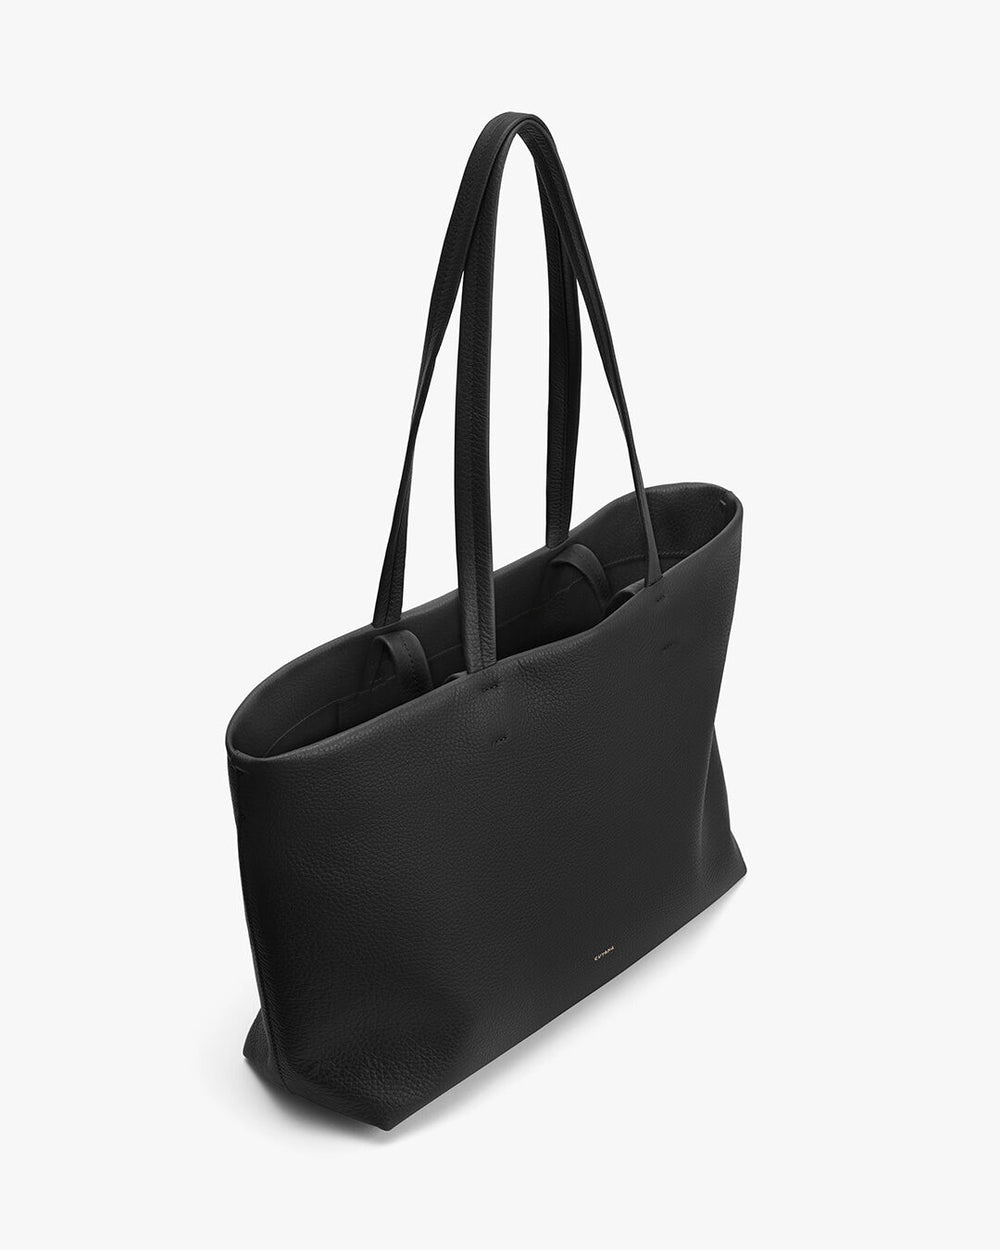 Tote bag with dual handles